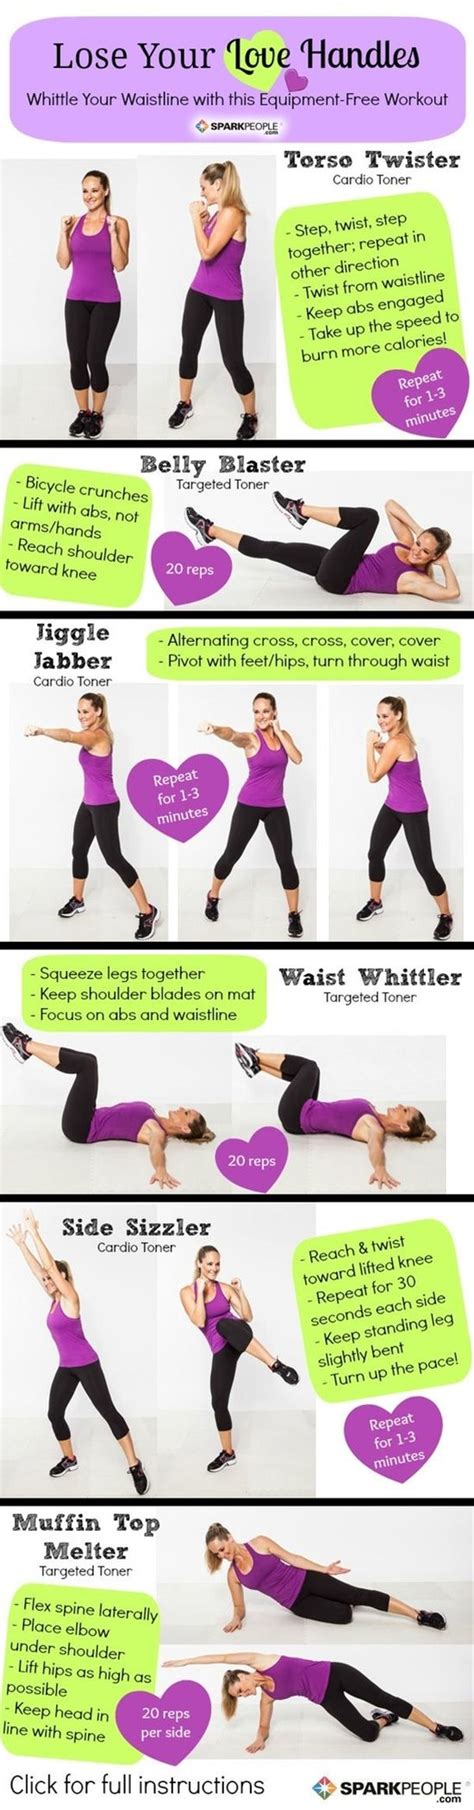 The Lose Your Love Handles Workout The Lose Your Love Handles